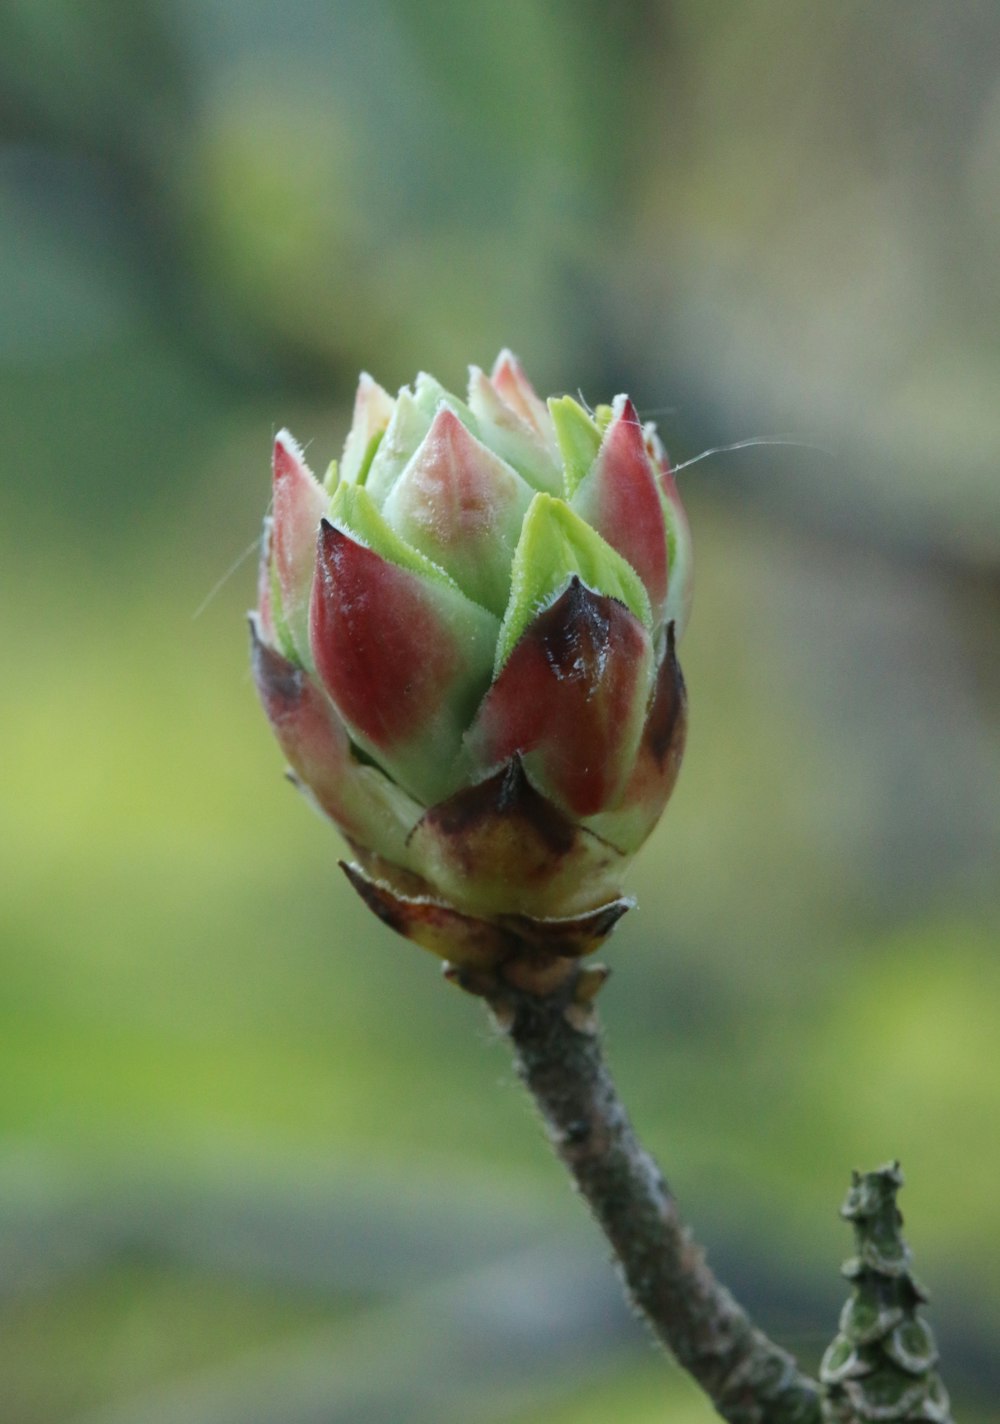 a close up of a flower bud on a tree branch